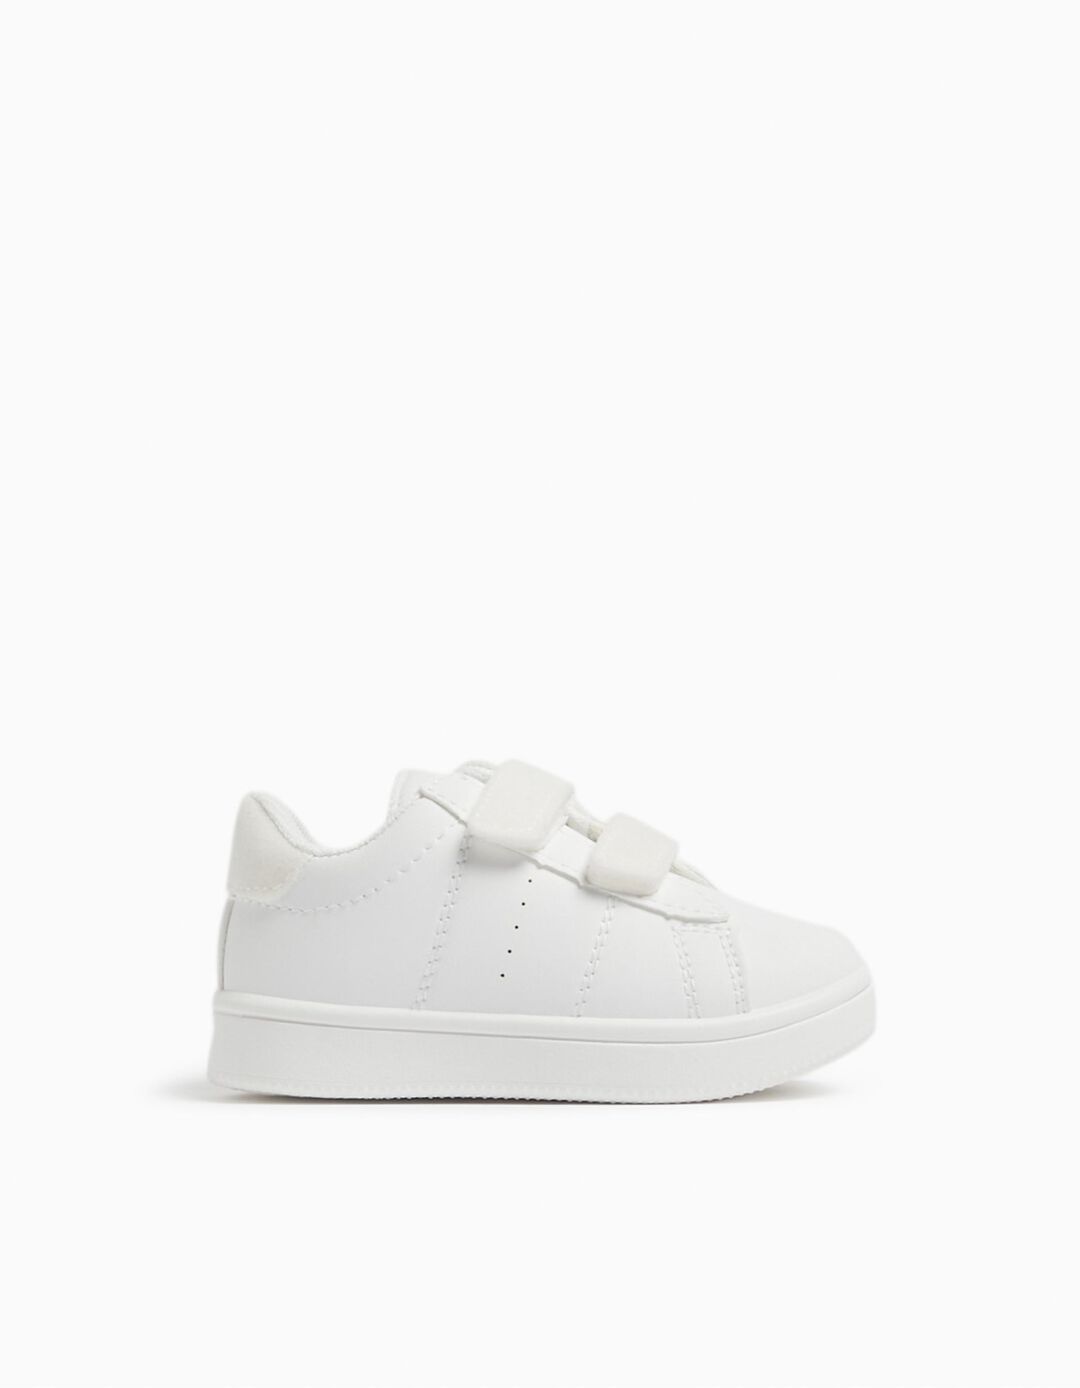 Sneakers, Baby Girl, White